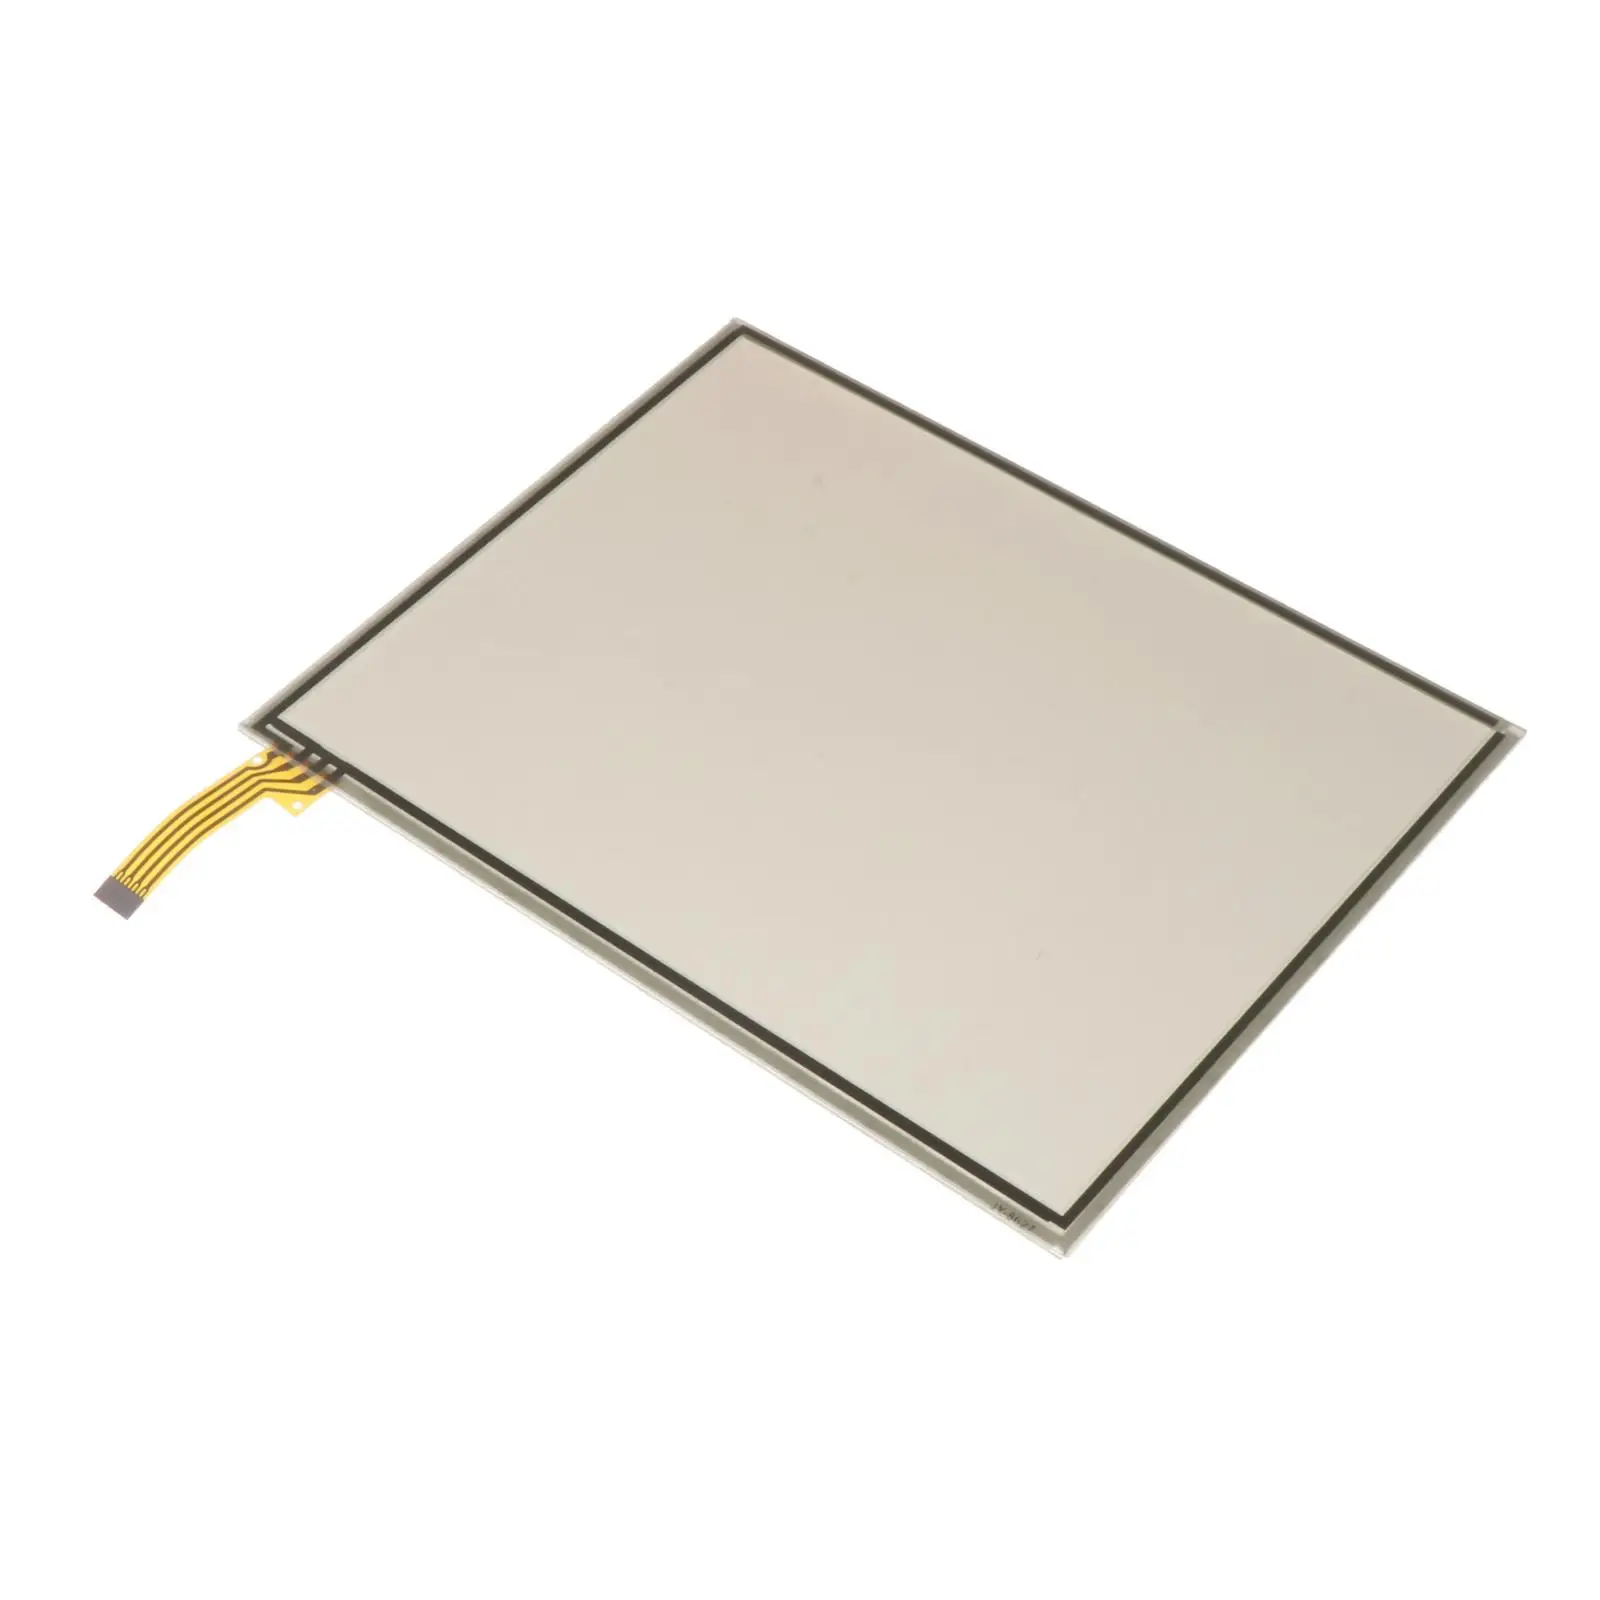 Touch Screen Glass Digitizer For Uconnect 3C 8.4A VP3 8.4AN VP4 Radio 8.4